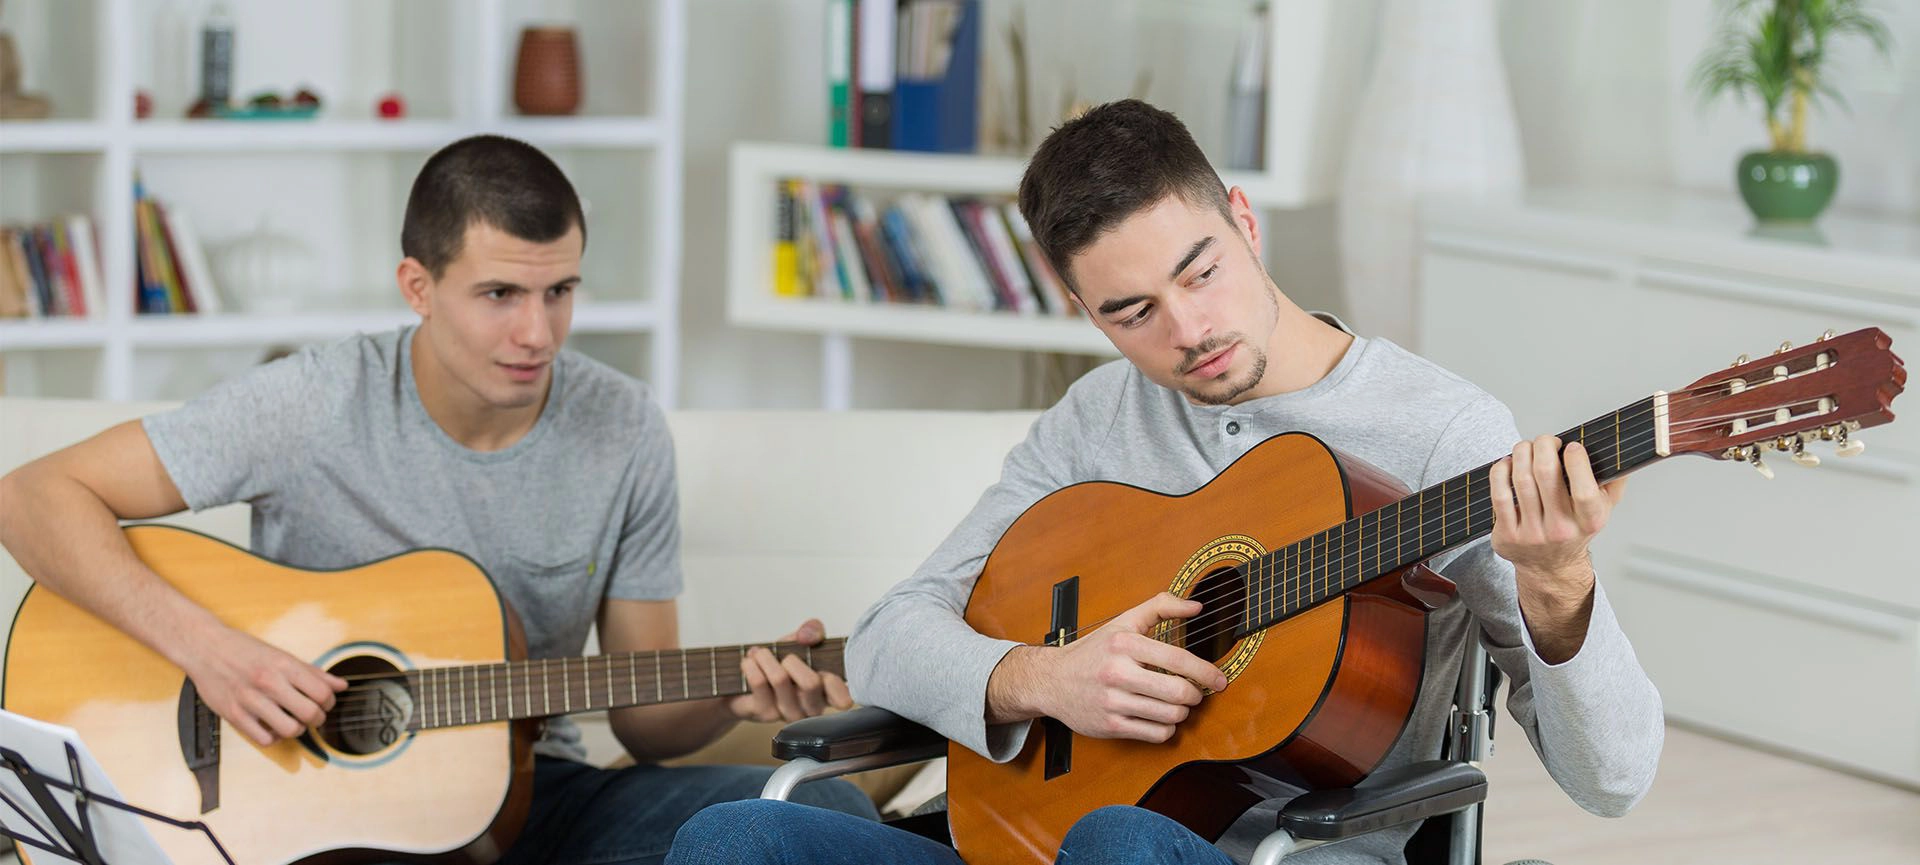 music therapy help addiction treatment